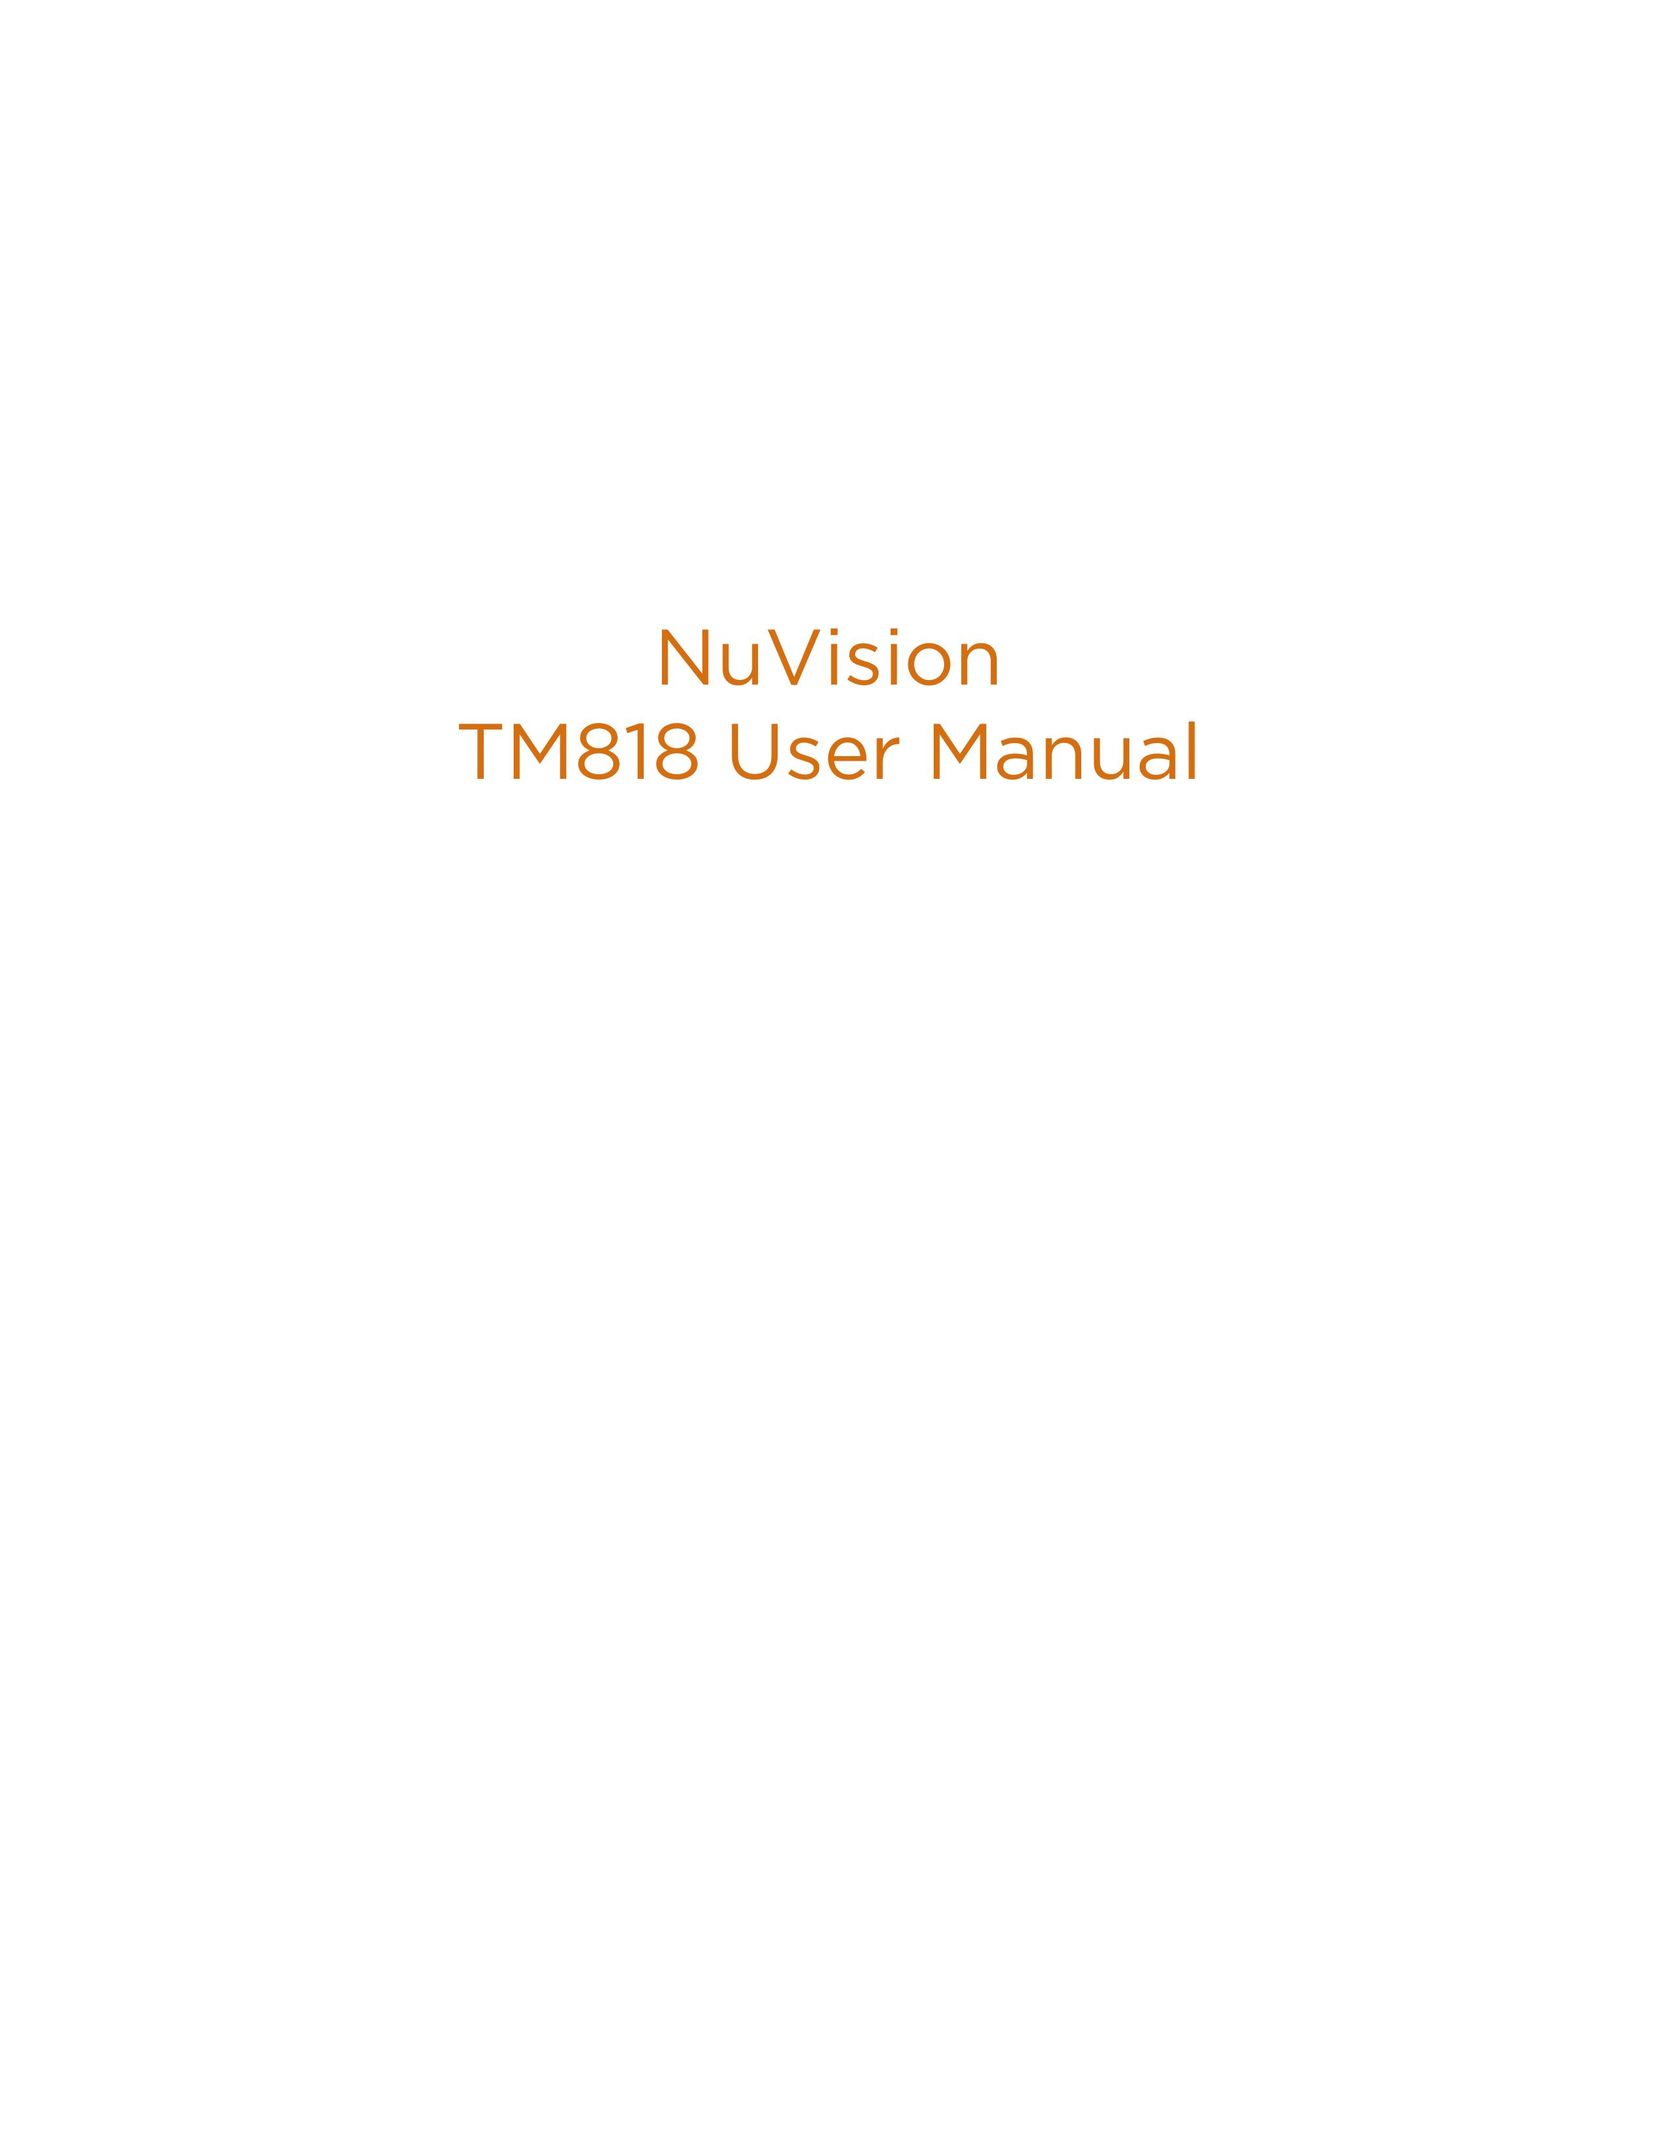 NuVision TM818 Graphics Tablet User Manual